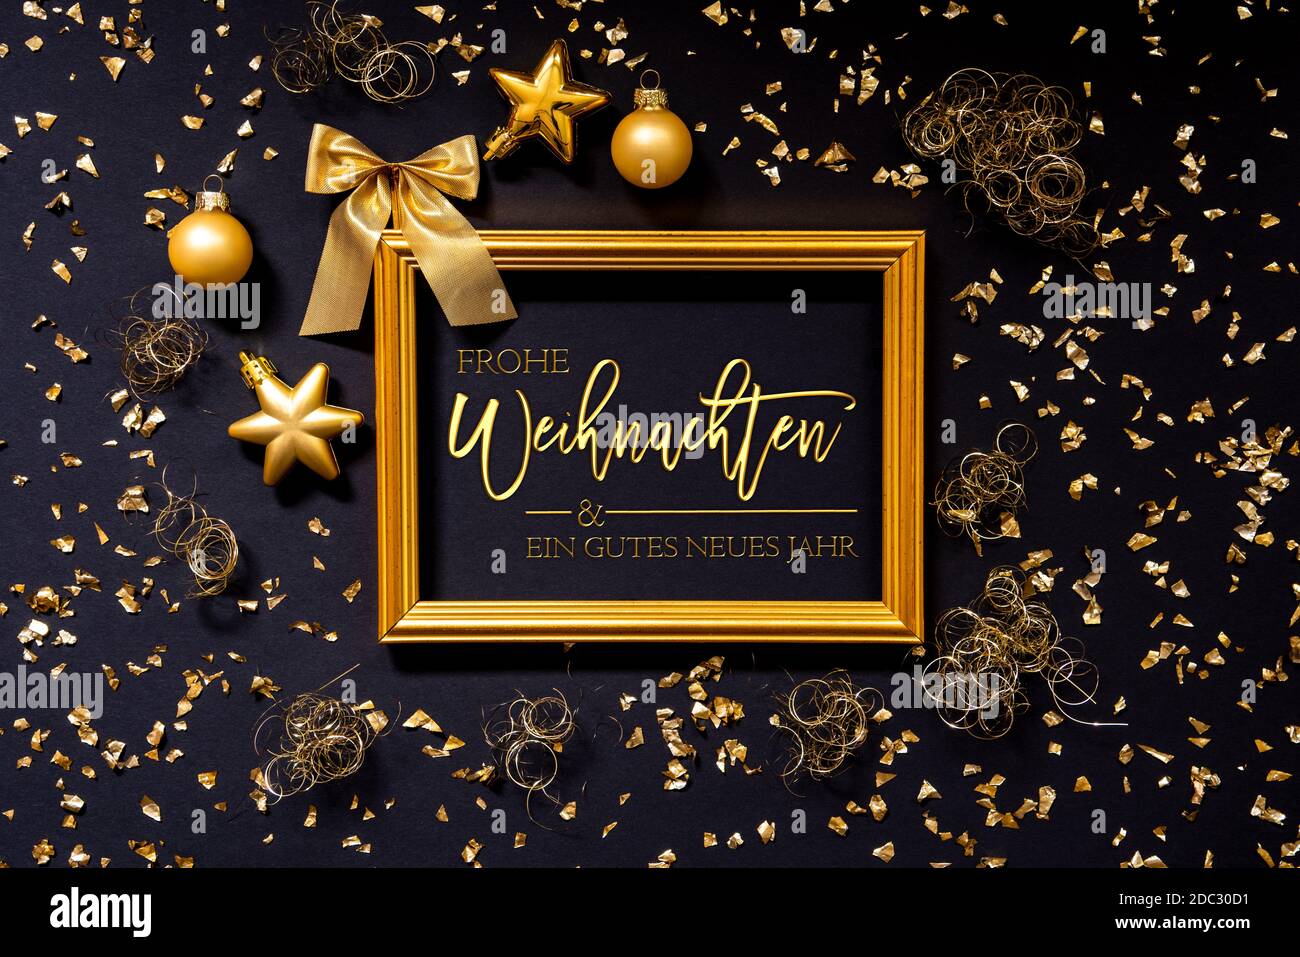 Frame With German Text Frohe Weihnachten Und Ein Gutes Neues Jahr Means Merry Christmas And A Happy New Year. Golden Christmas Decoration And Ornament Stock Photo